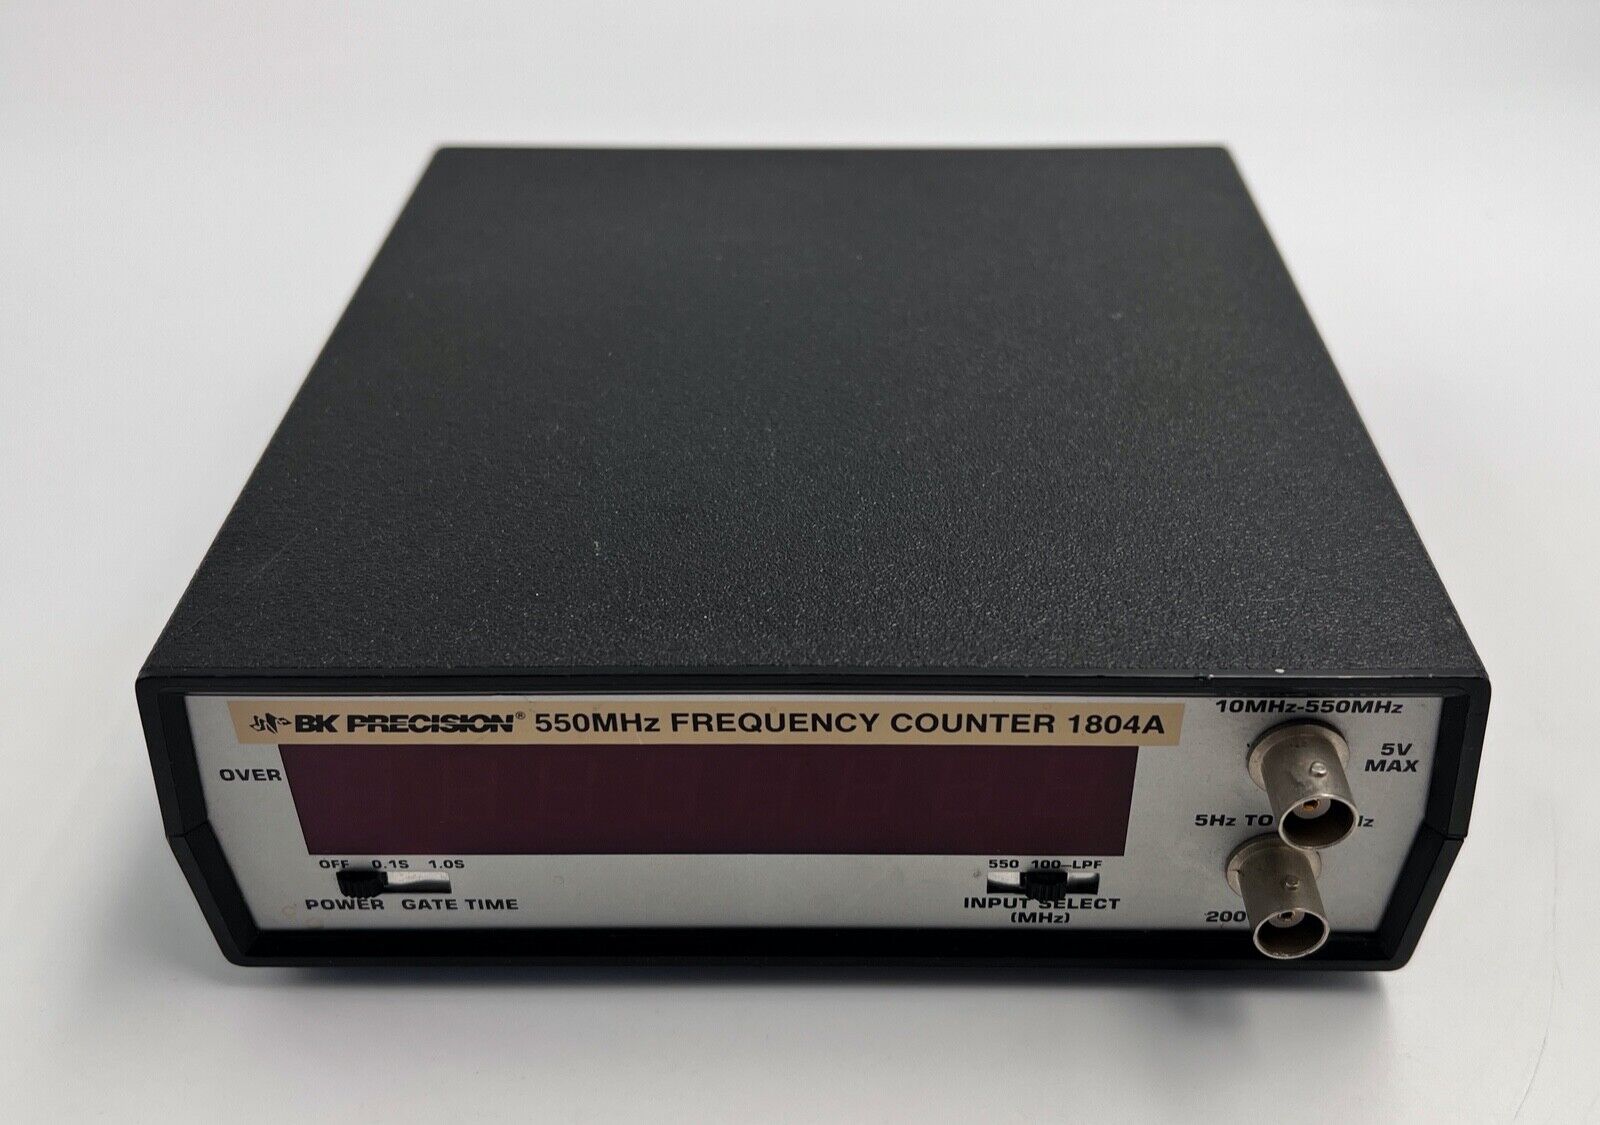 B&k Precision Model 1804a 550mhz Frequency Counter